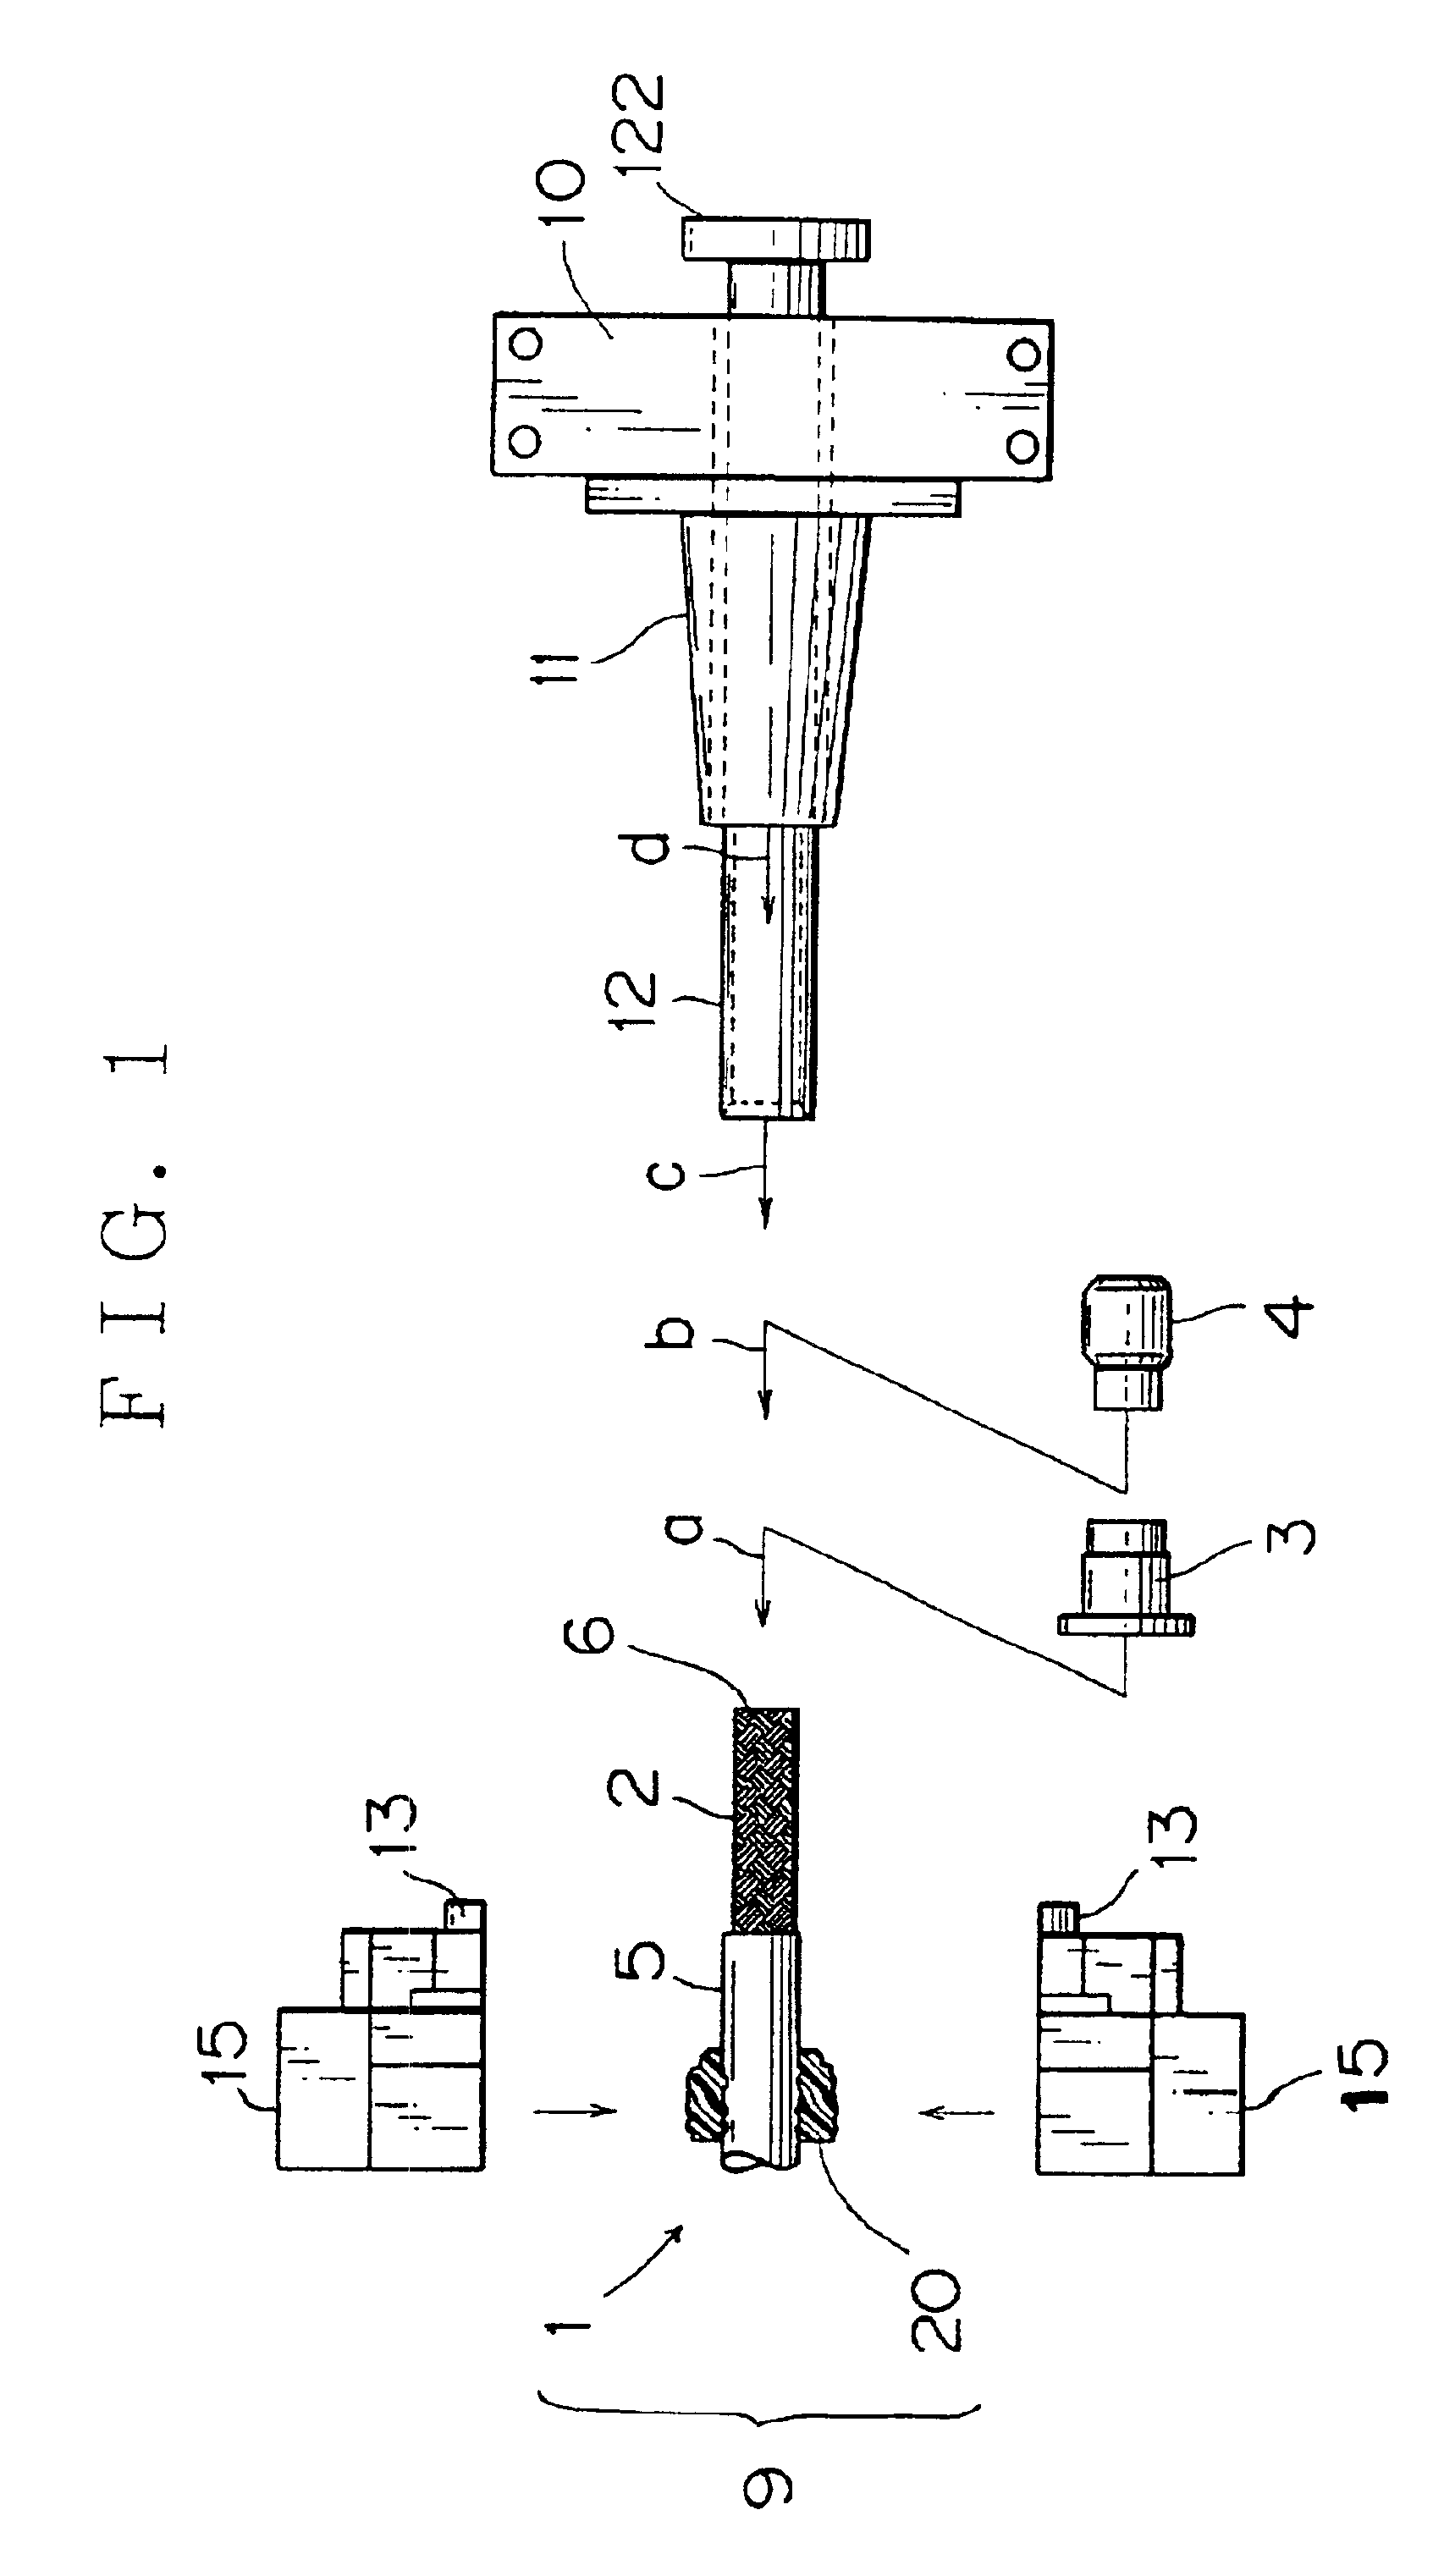 Apparatus for finishing stripped end of shield wire